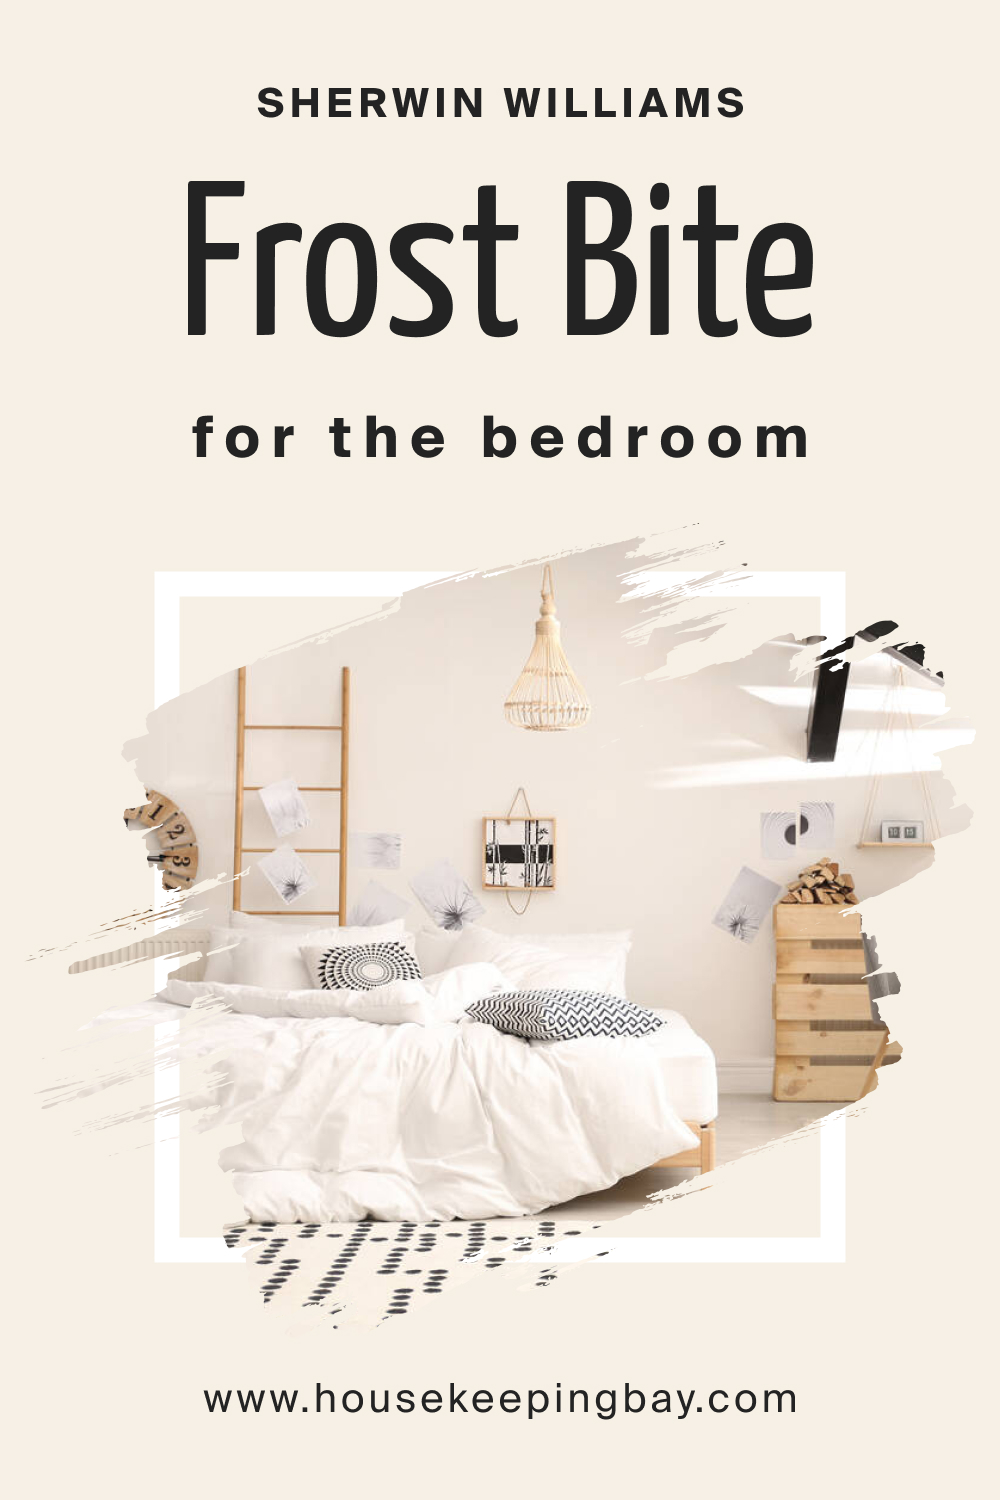 Sherwin Williams. SW 9505 Frost Bite For the bedroom